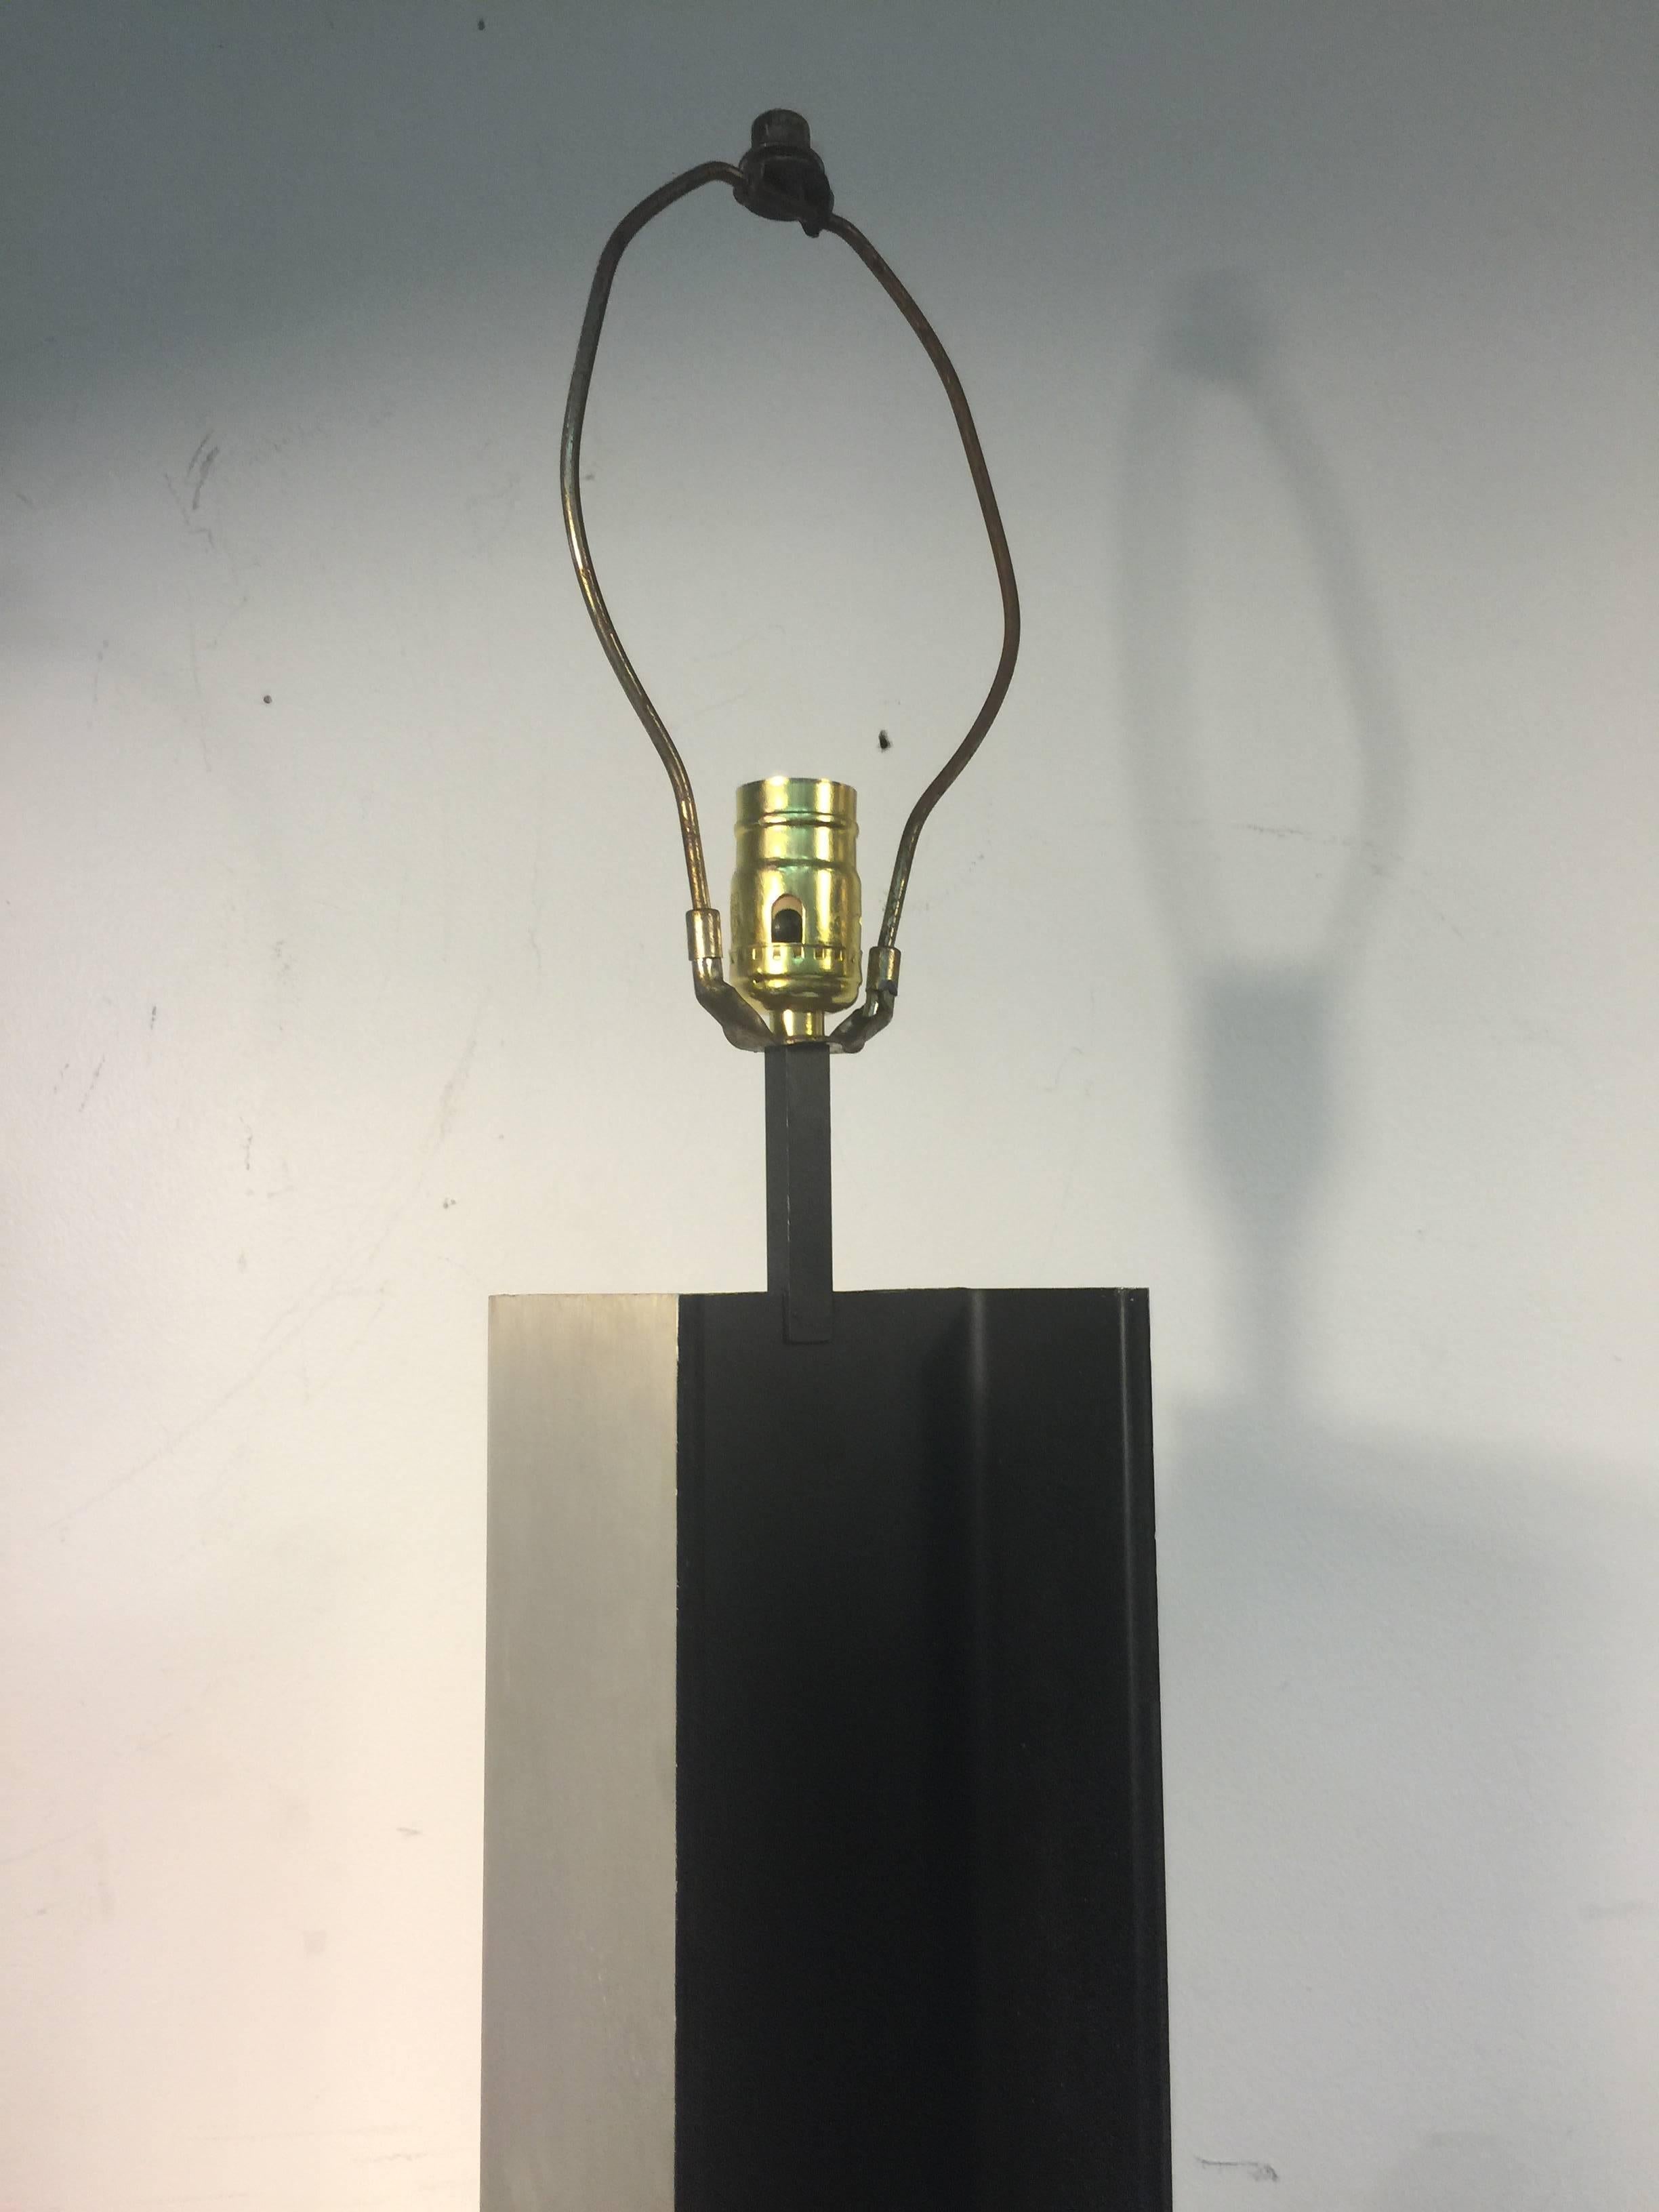 Striking I Beam Aluminum Column Table Lamp by Laurel In Good Condition For Sale In Mount Penn, PA